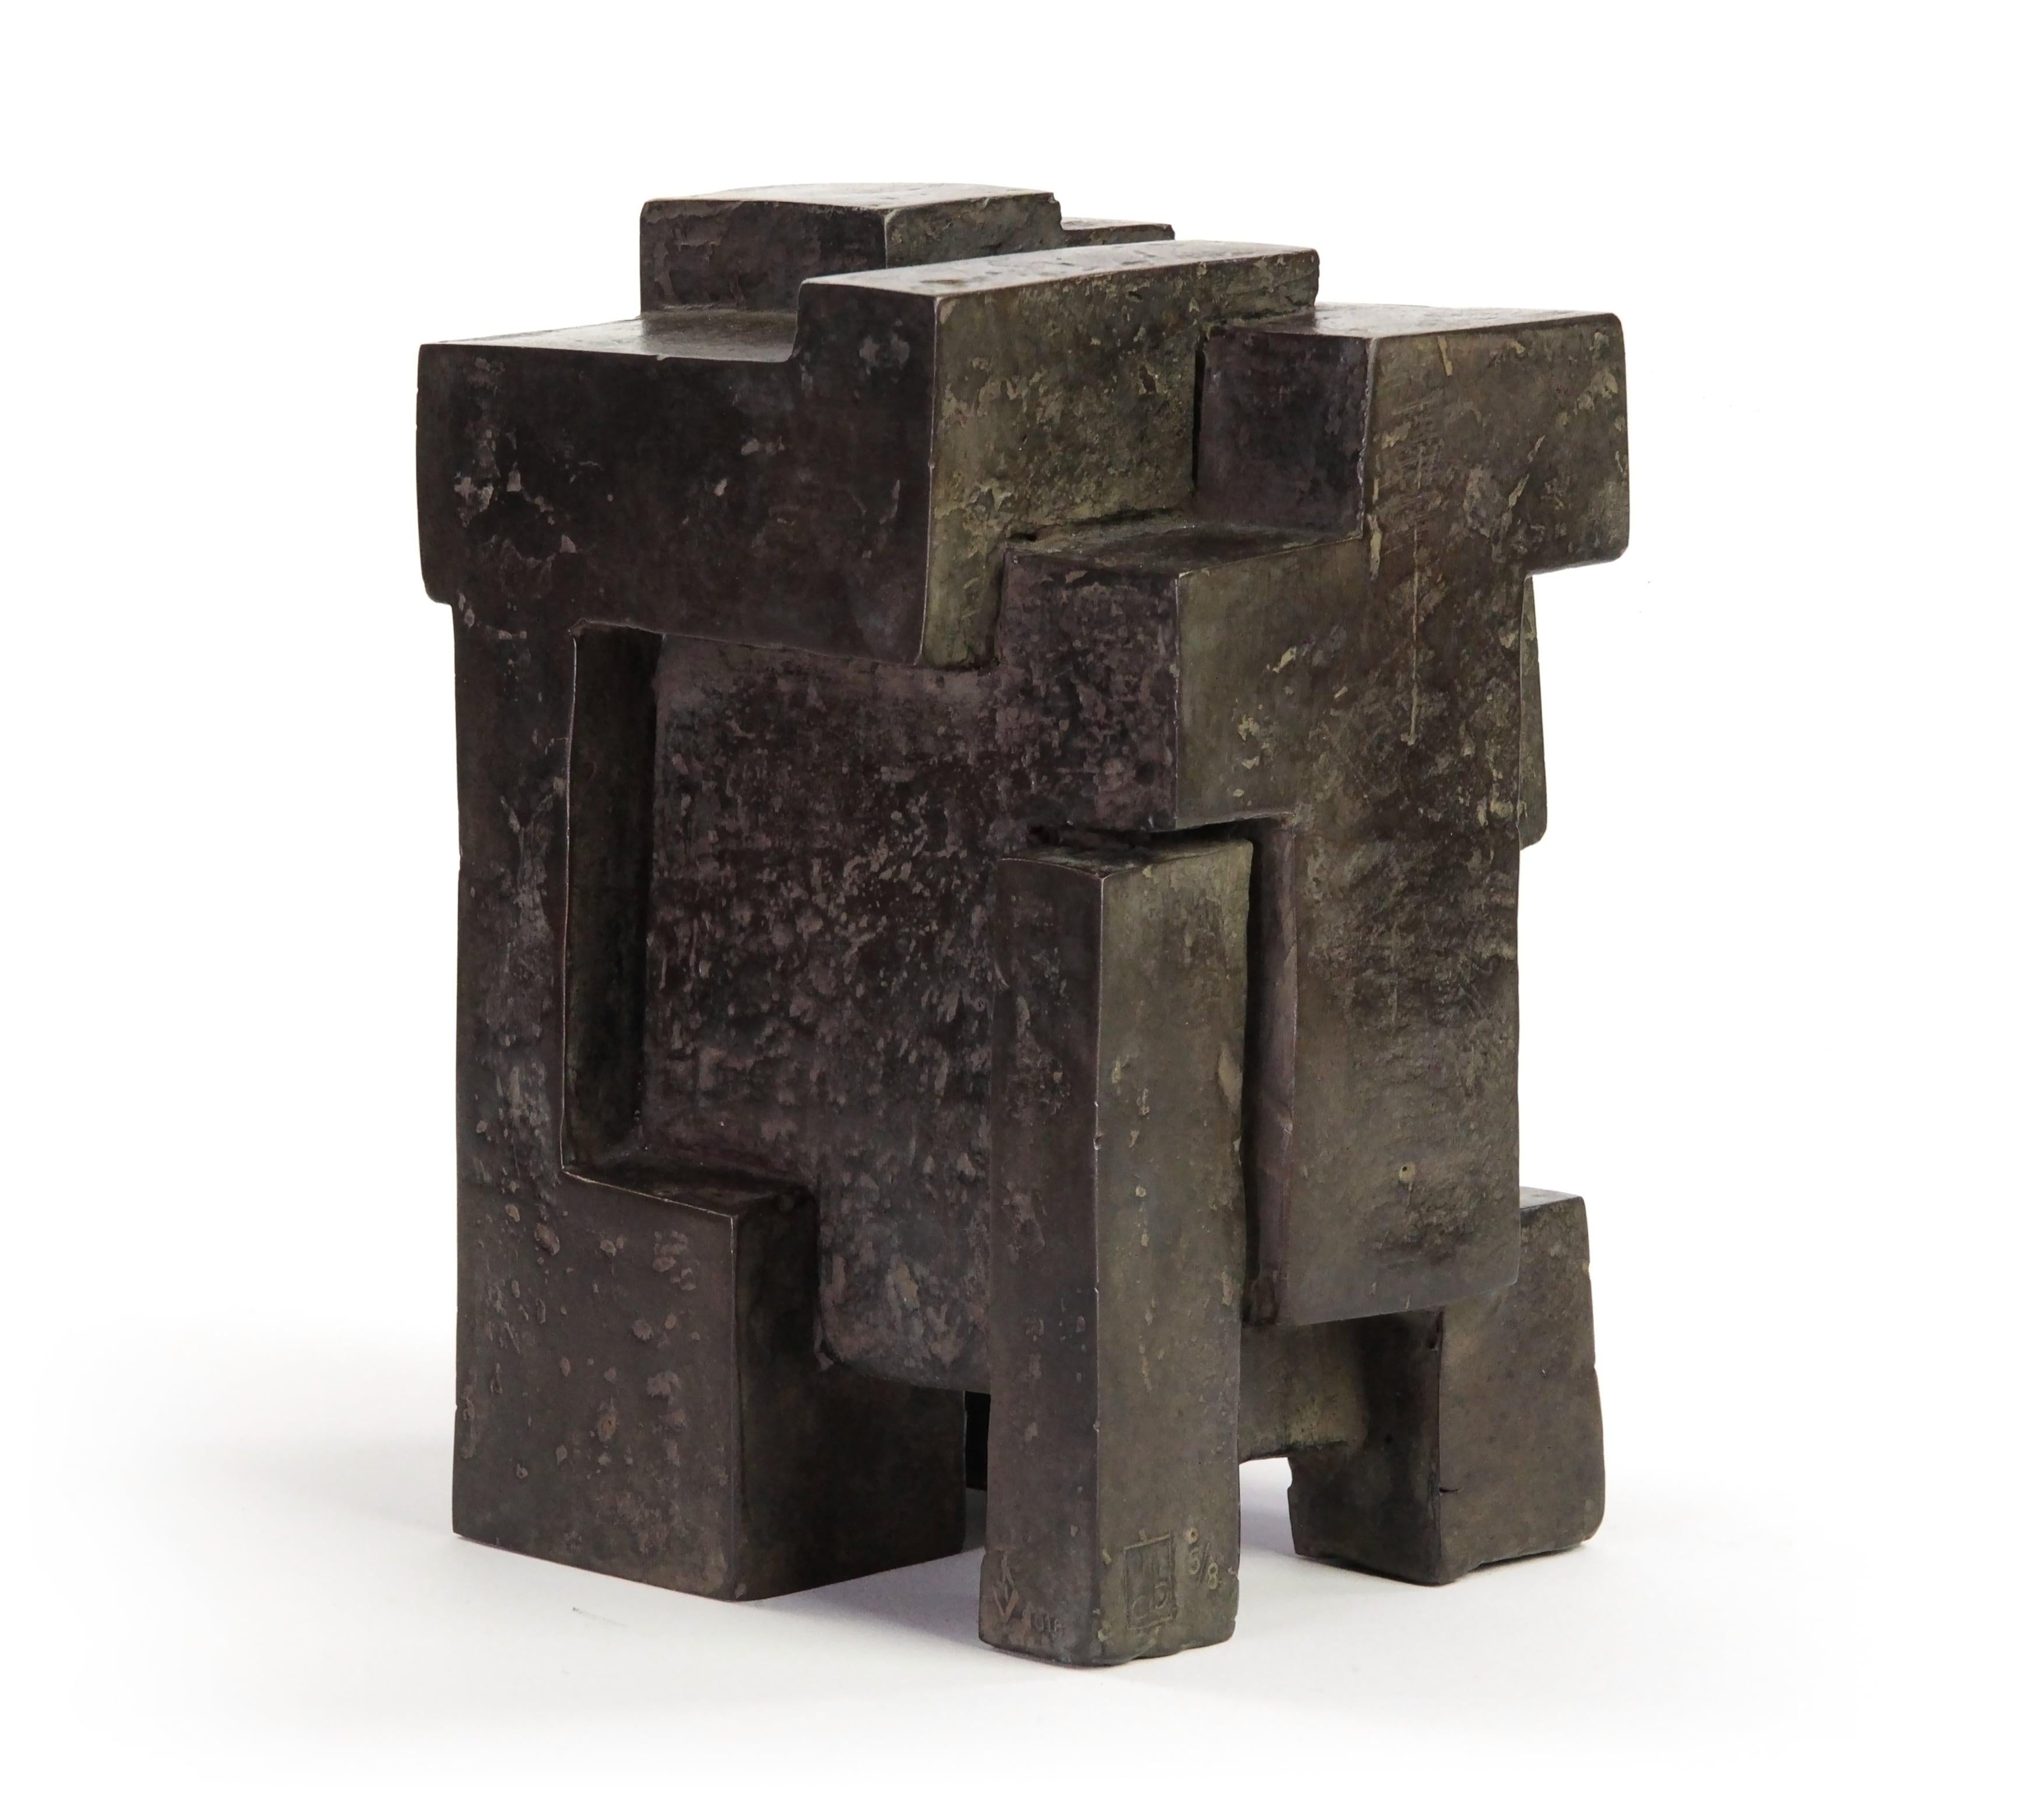 Block III is a bronze sculpture by French contemporary artist Delphine Brabant from the series 